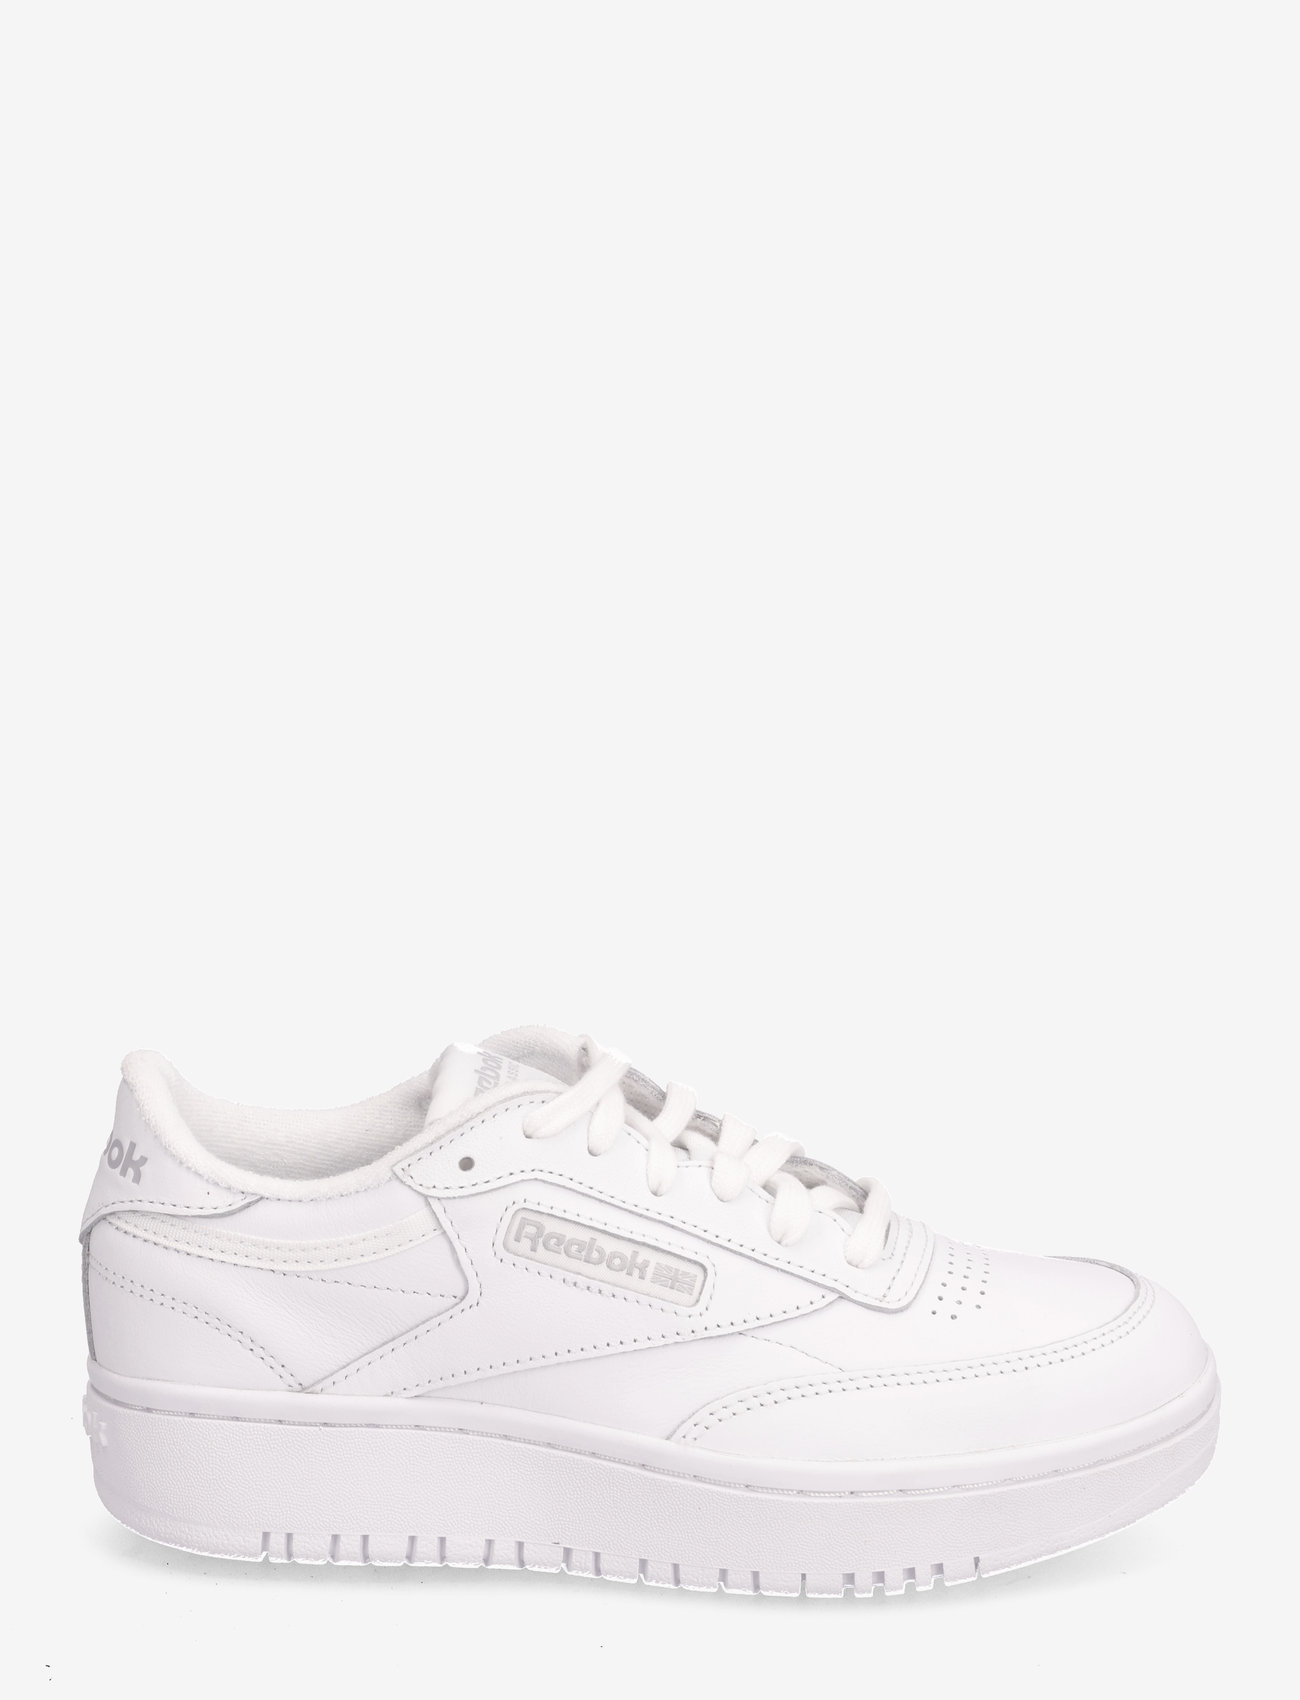 Reebok Classics - CLUB C DOUBLE - lave sneakers - ftwwht/ftwwht/cdgry2 - 1